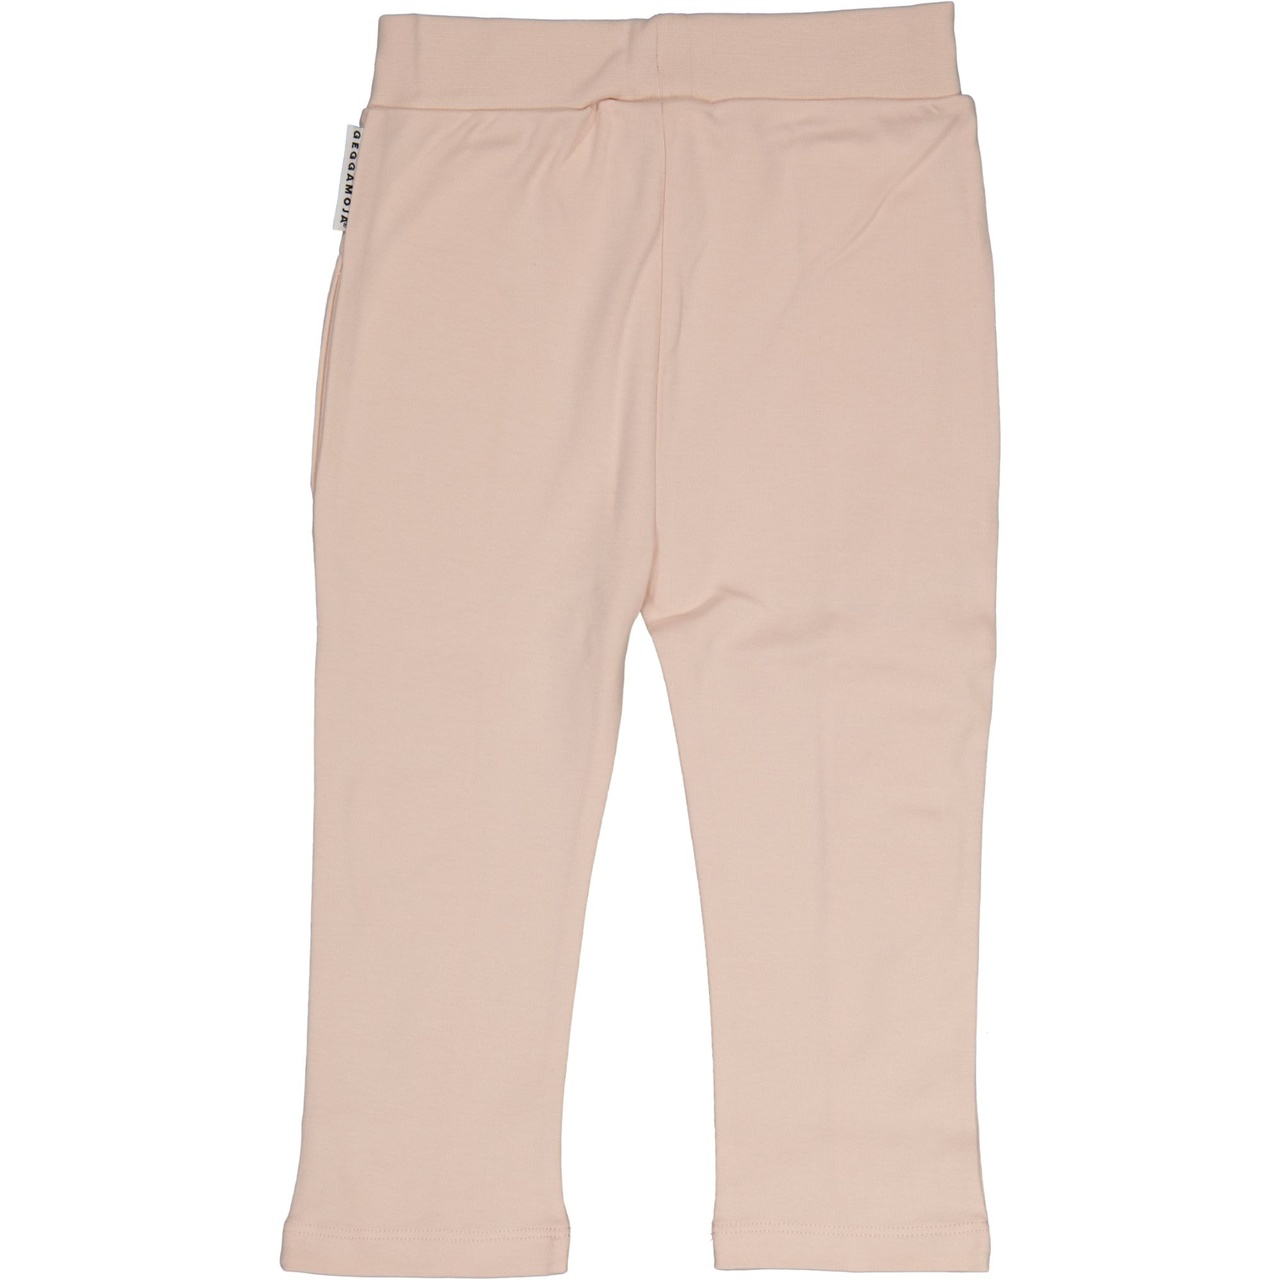 Flounce pant L.pink/offwhite 134/140